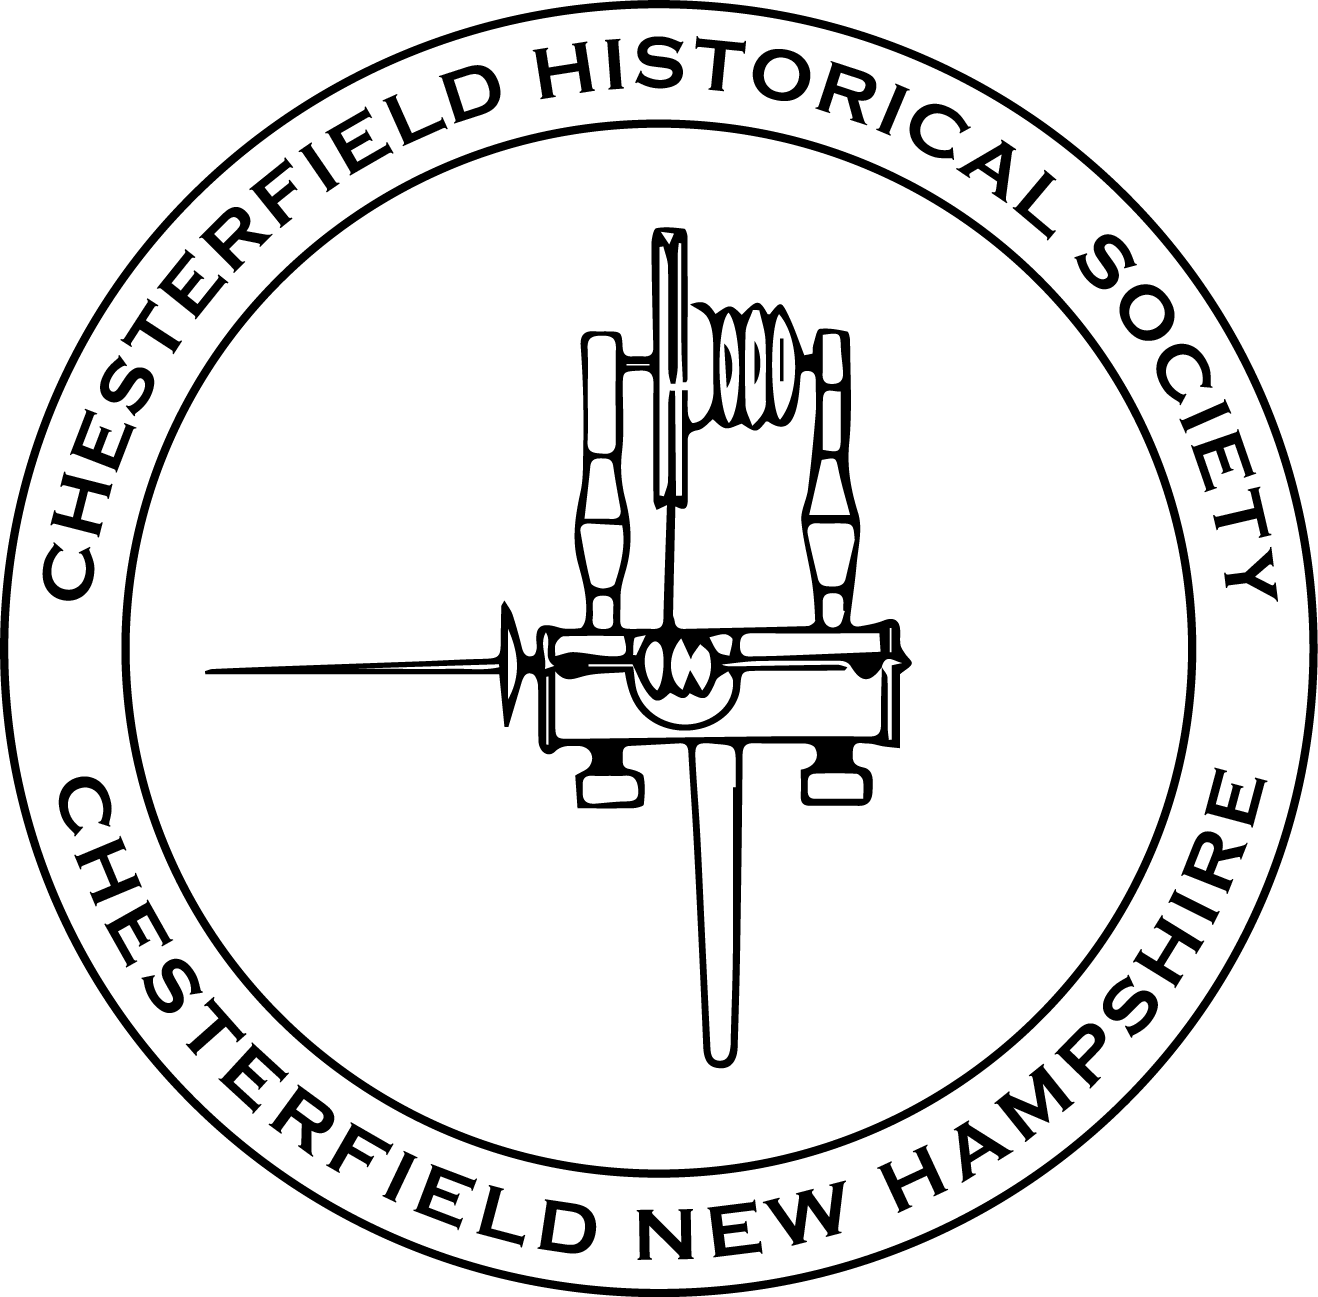 Chesterfield Historical Society - Chesterfield New Hampshire